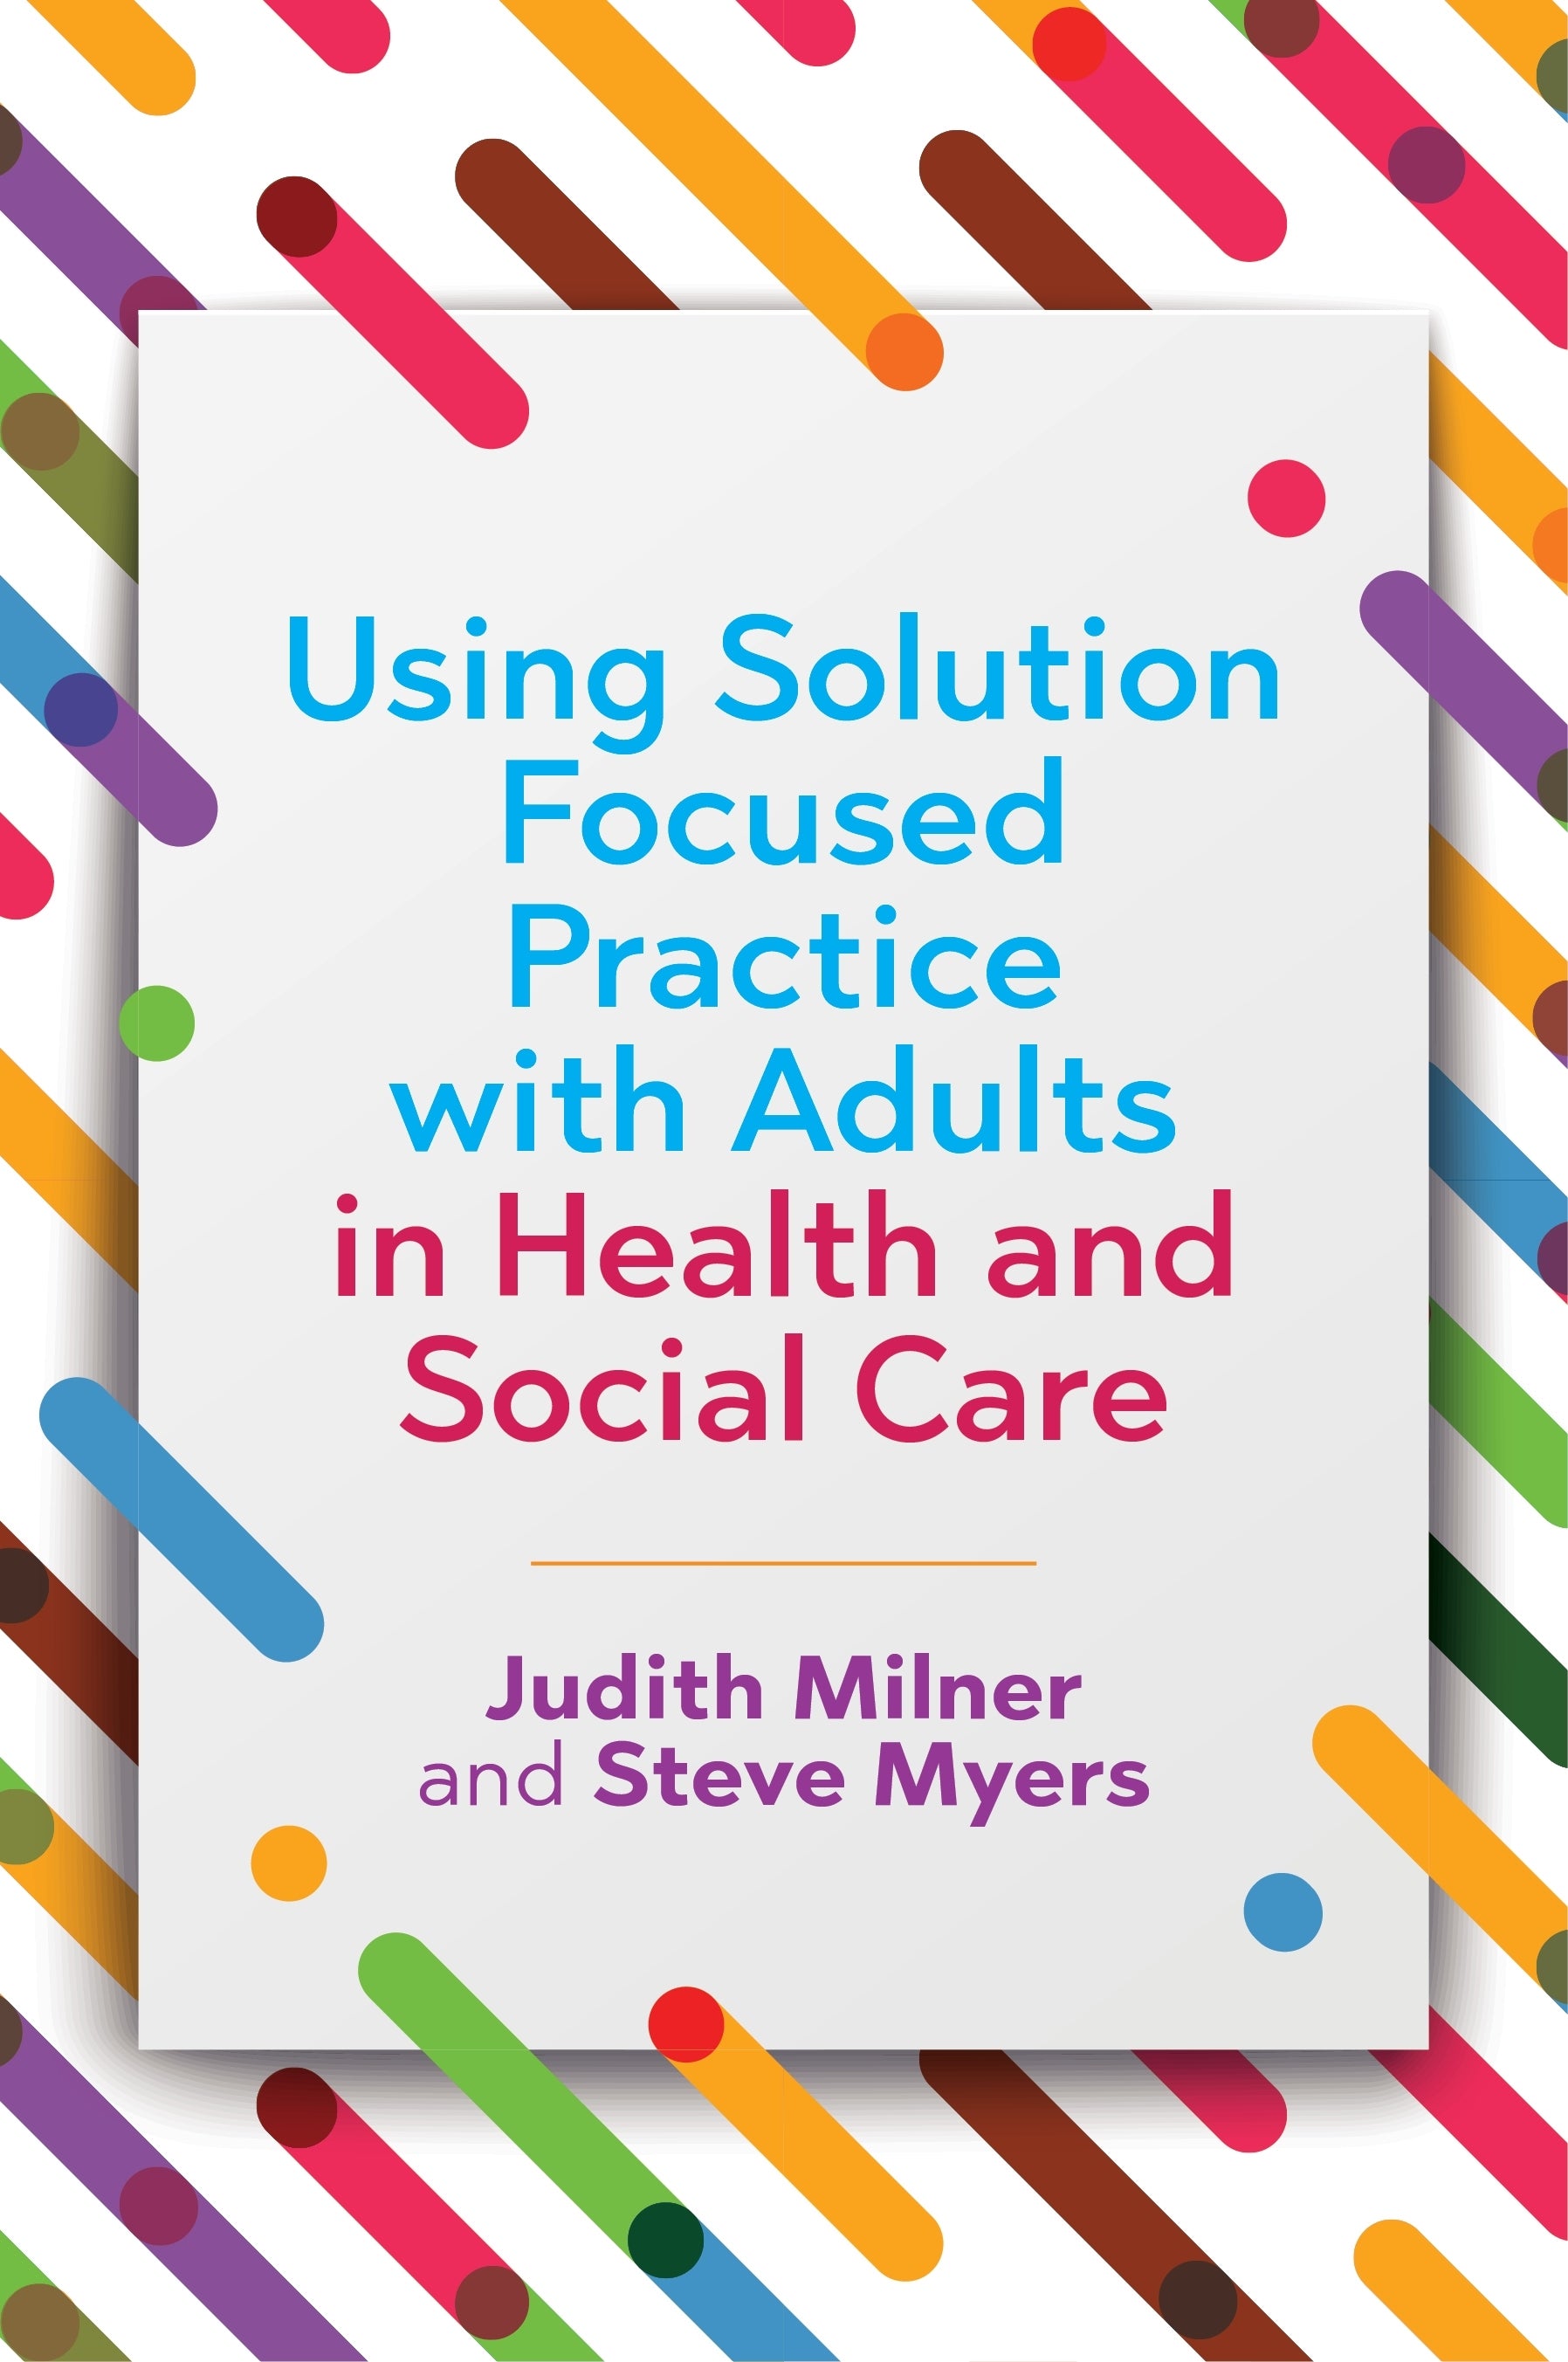 Using Solution Focused Practice with Adults in Health and Social Care by Steve Myers, Judith Milner